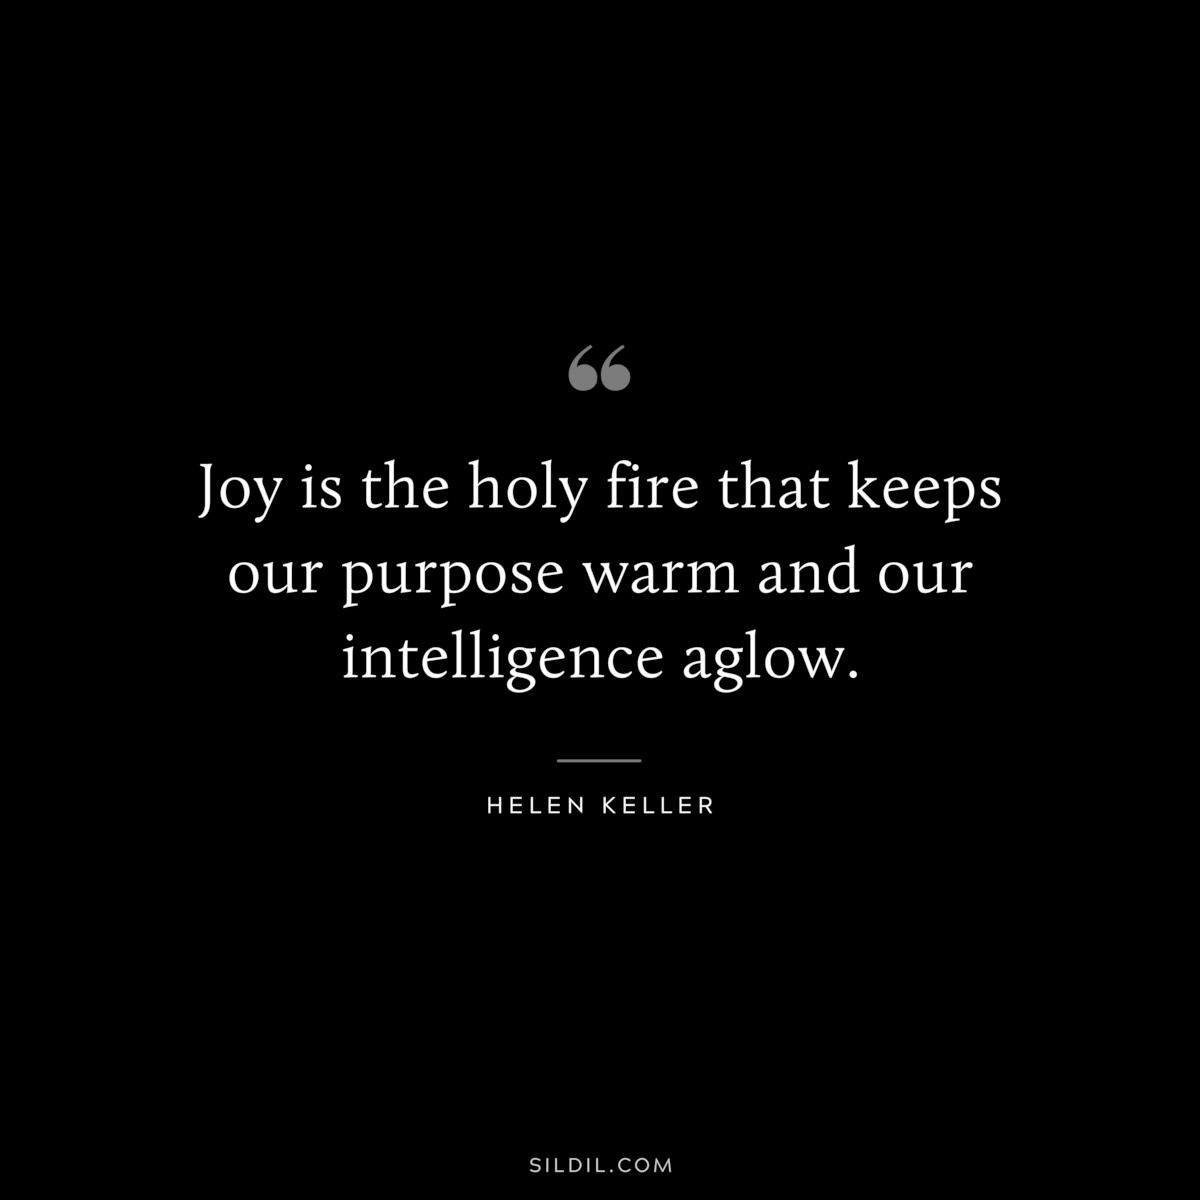 Joy is the holy fire that keeps our purpose warm and our intelligence aglow. ― Helen Keller